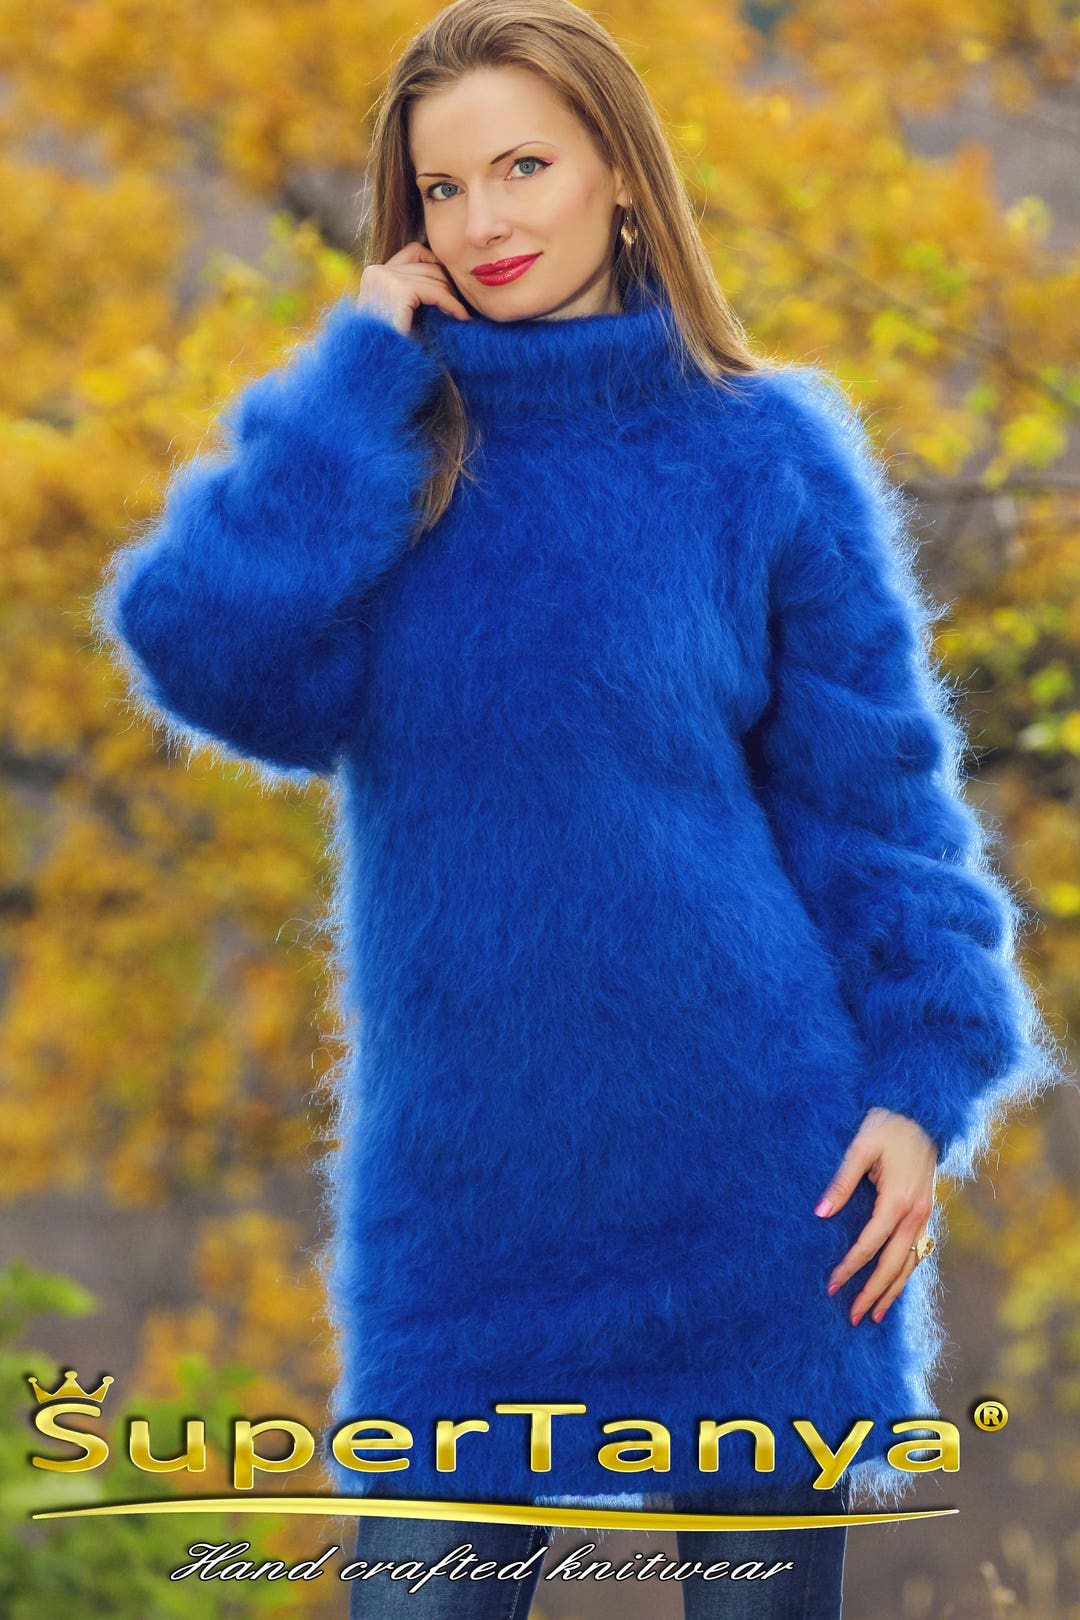 Fuzzy Blue Long Mohair Light Sweater Dress by SUPERTANYA - Etsy